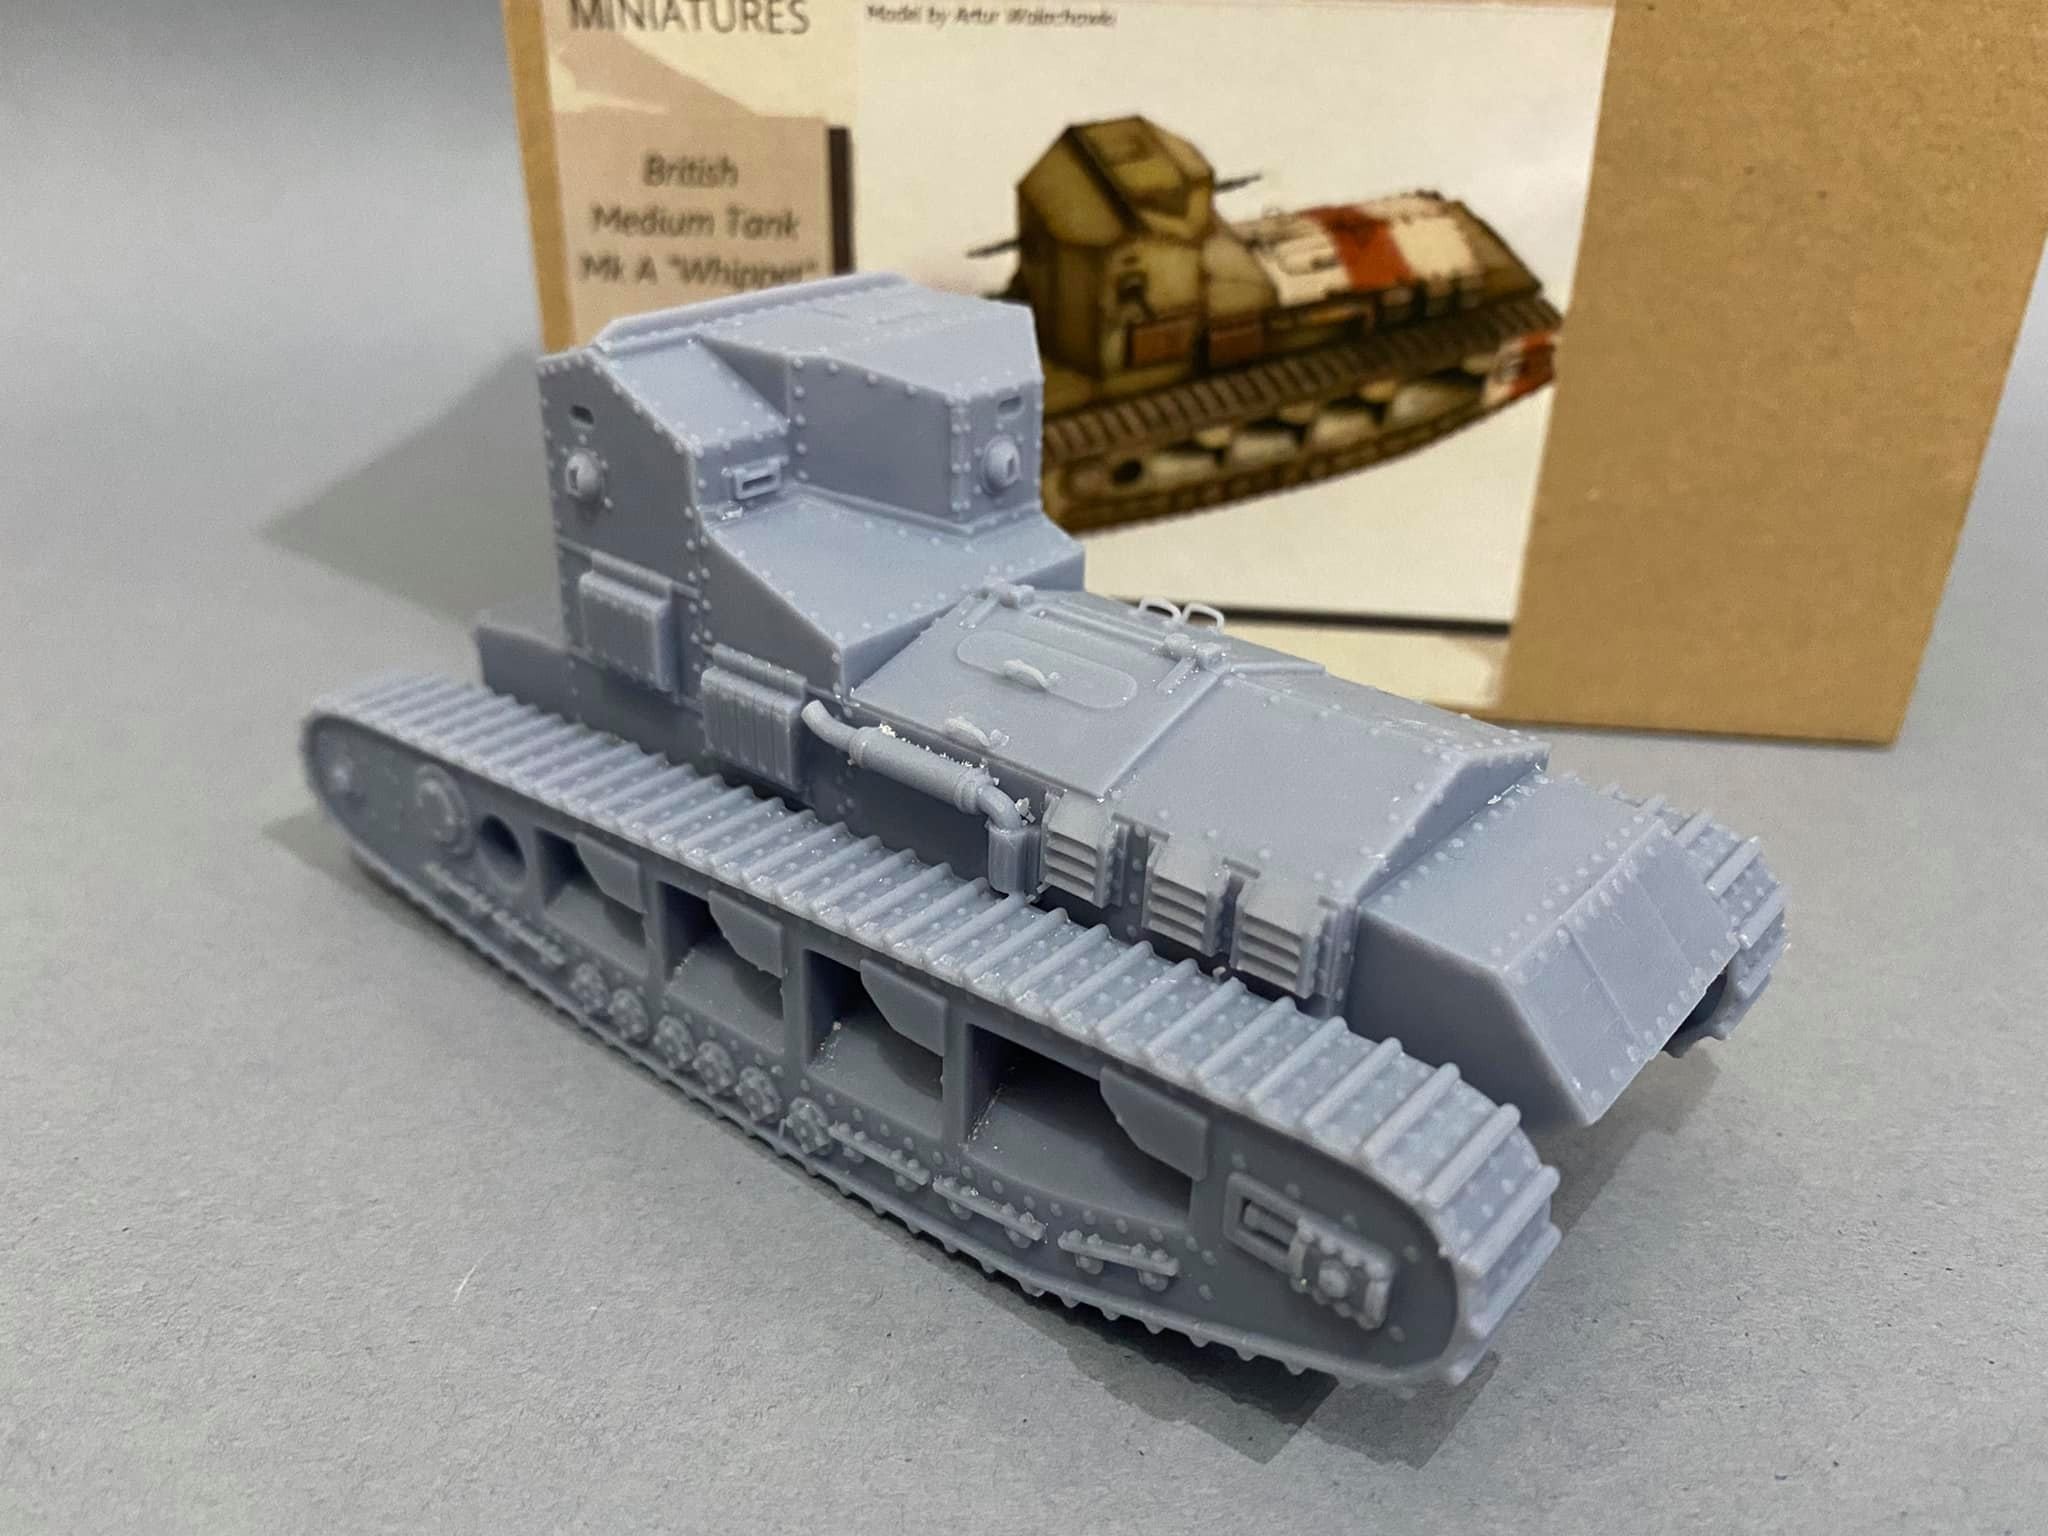 1/48 Scale Kit